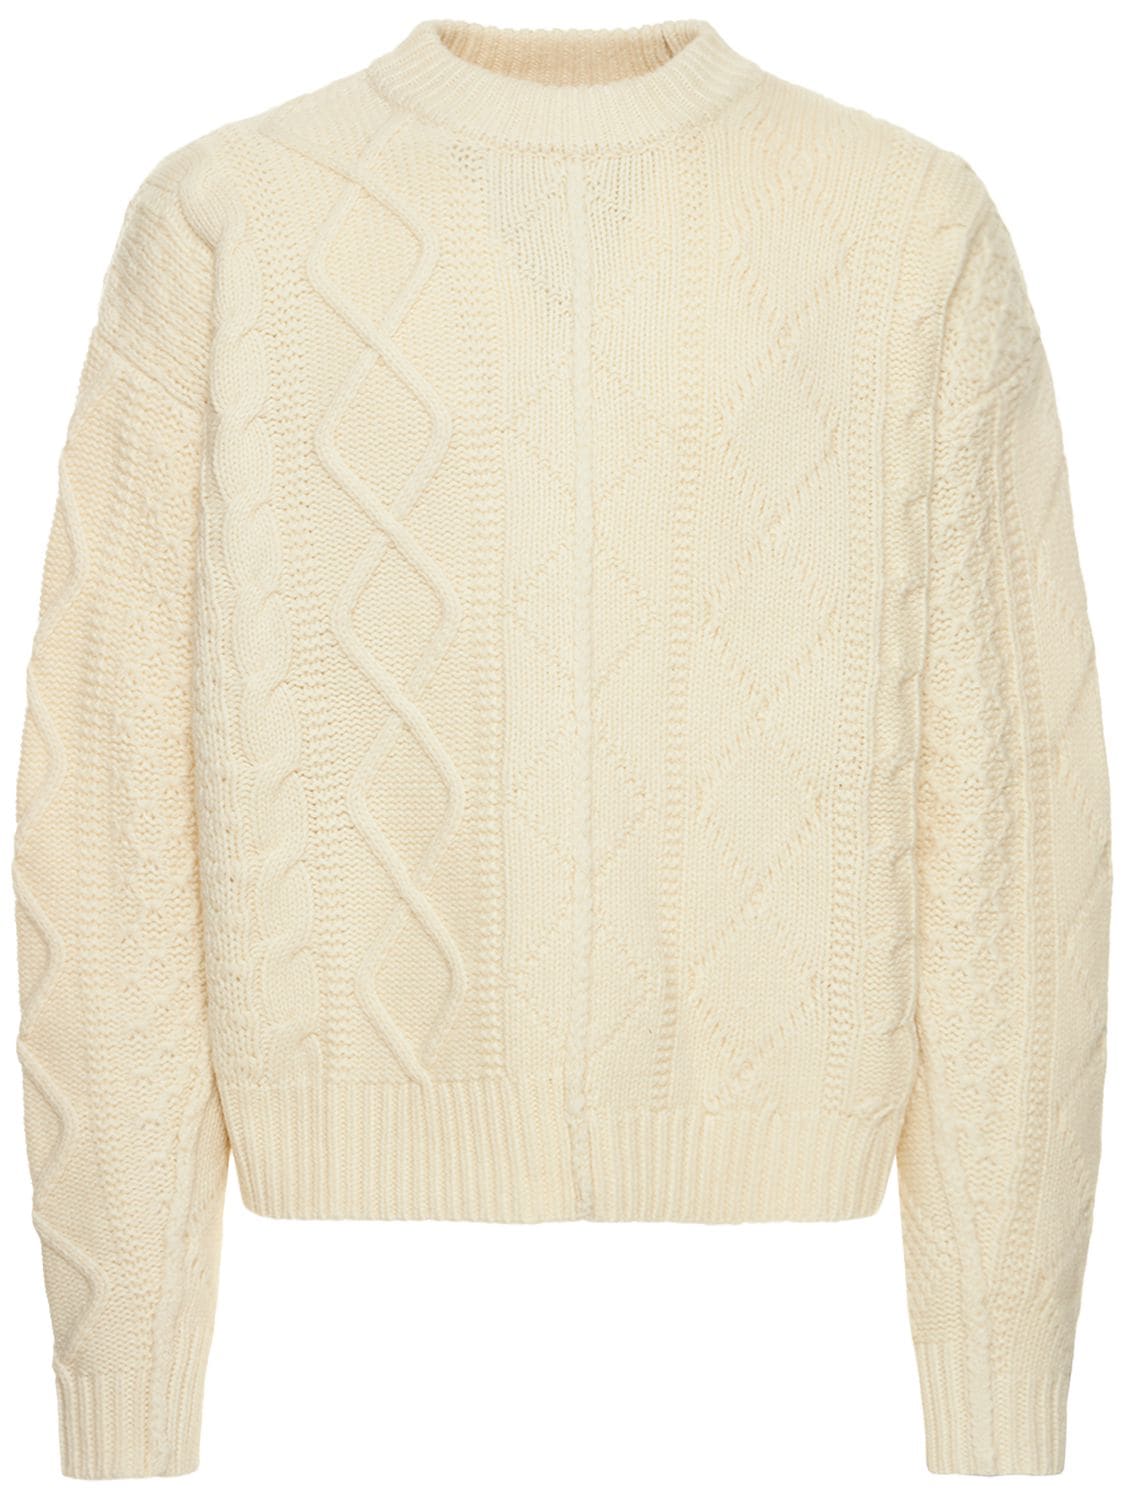 AXEL ARIGATO NOBLE KNIT SWEATER